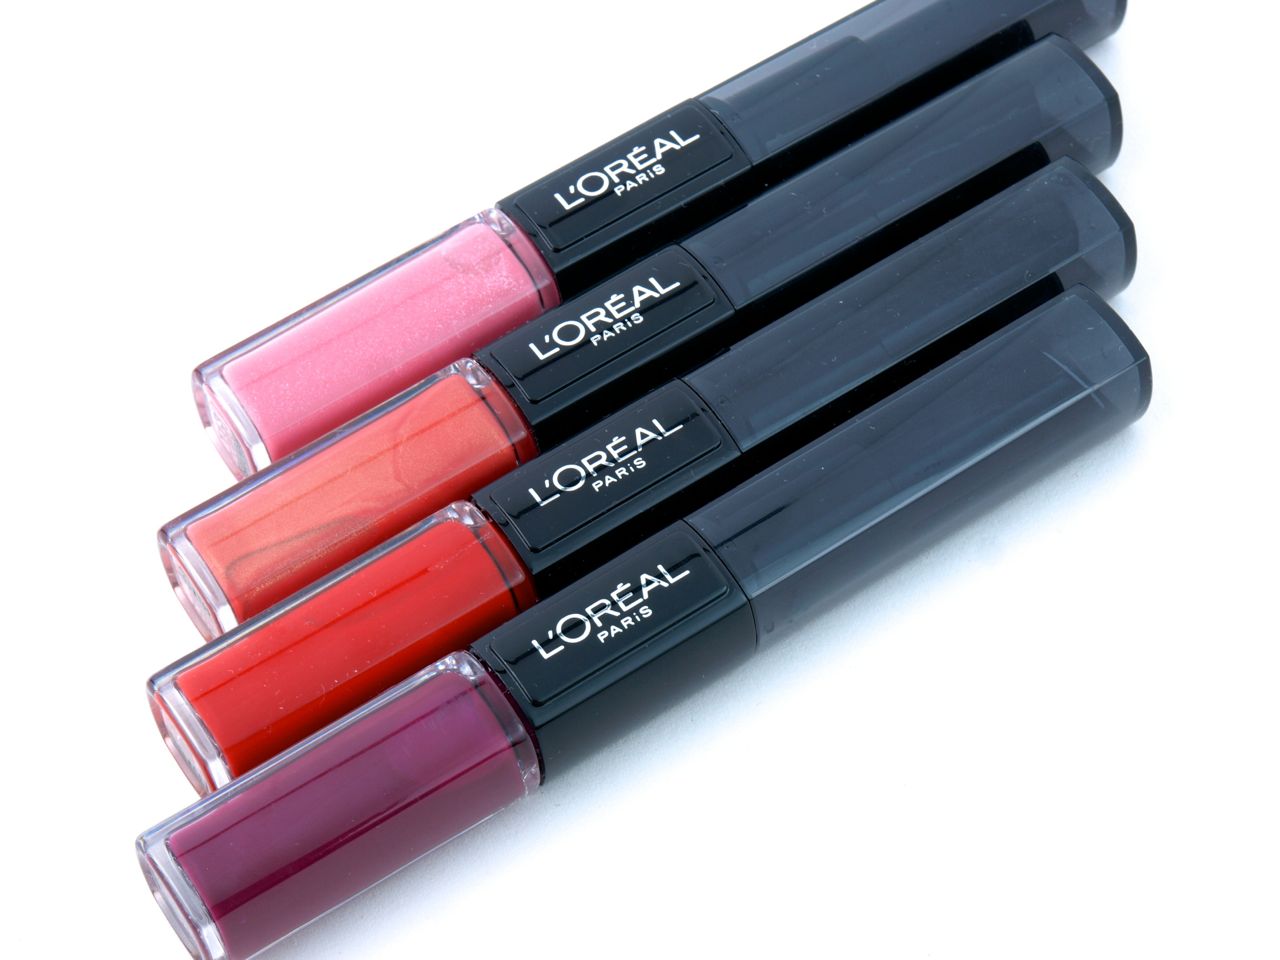 L'Oreal Infallible 2-Step Lipcolor: Review and Swatches